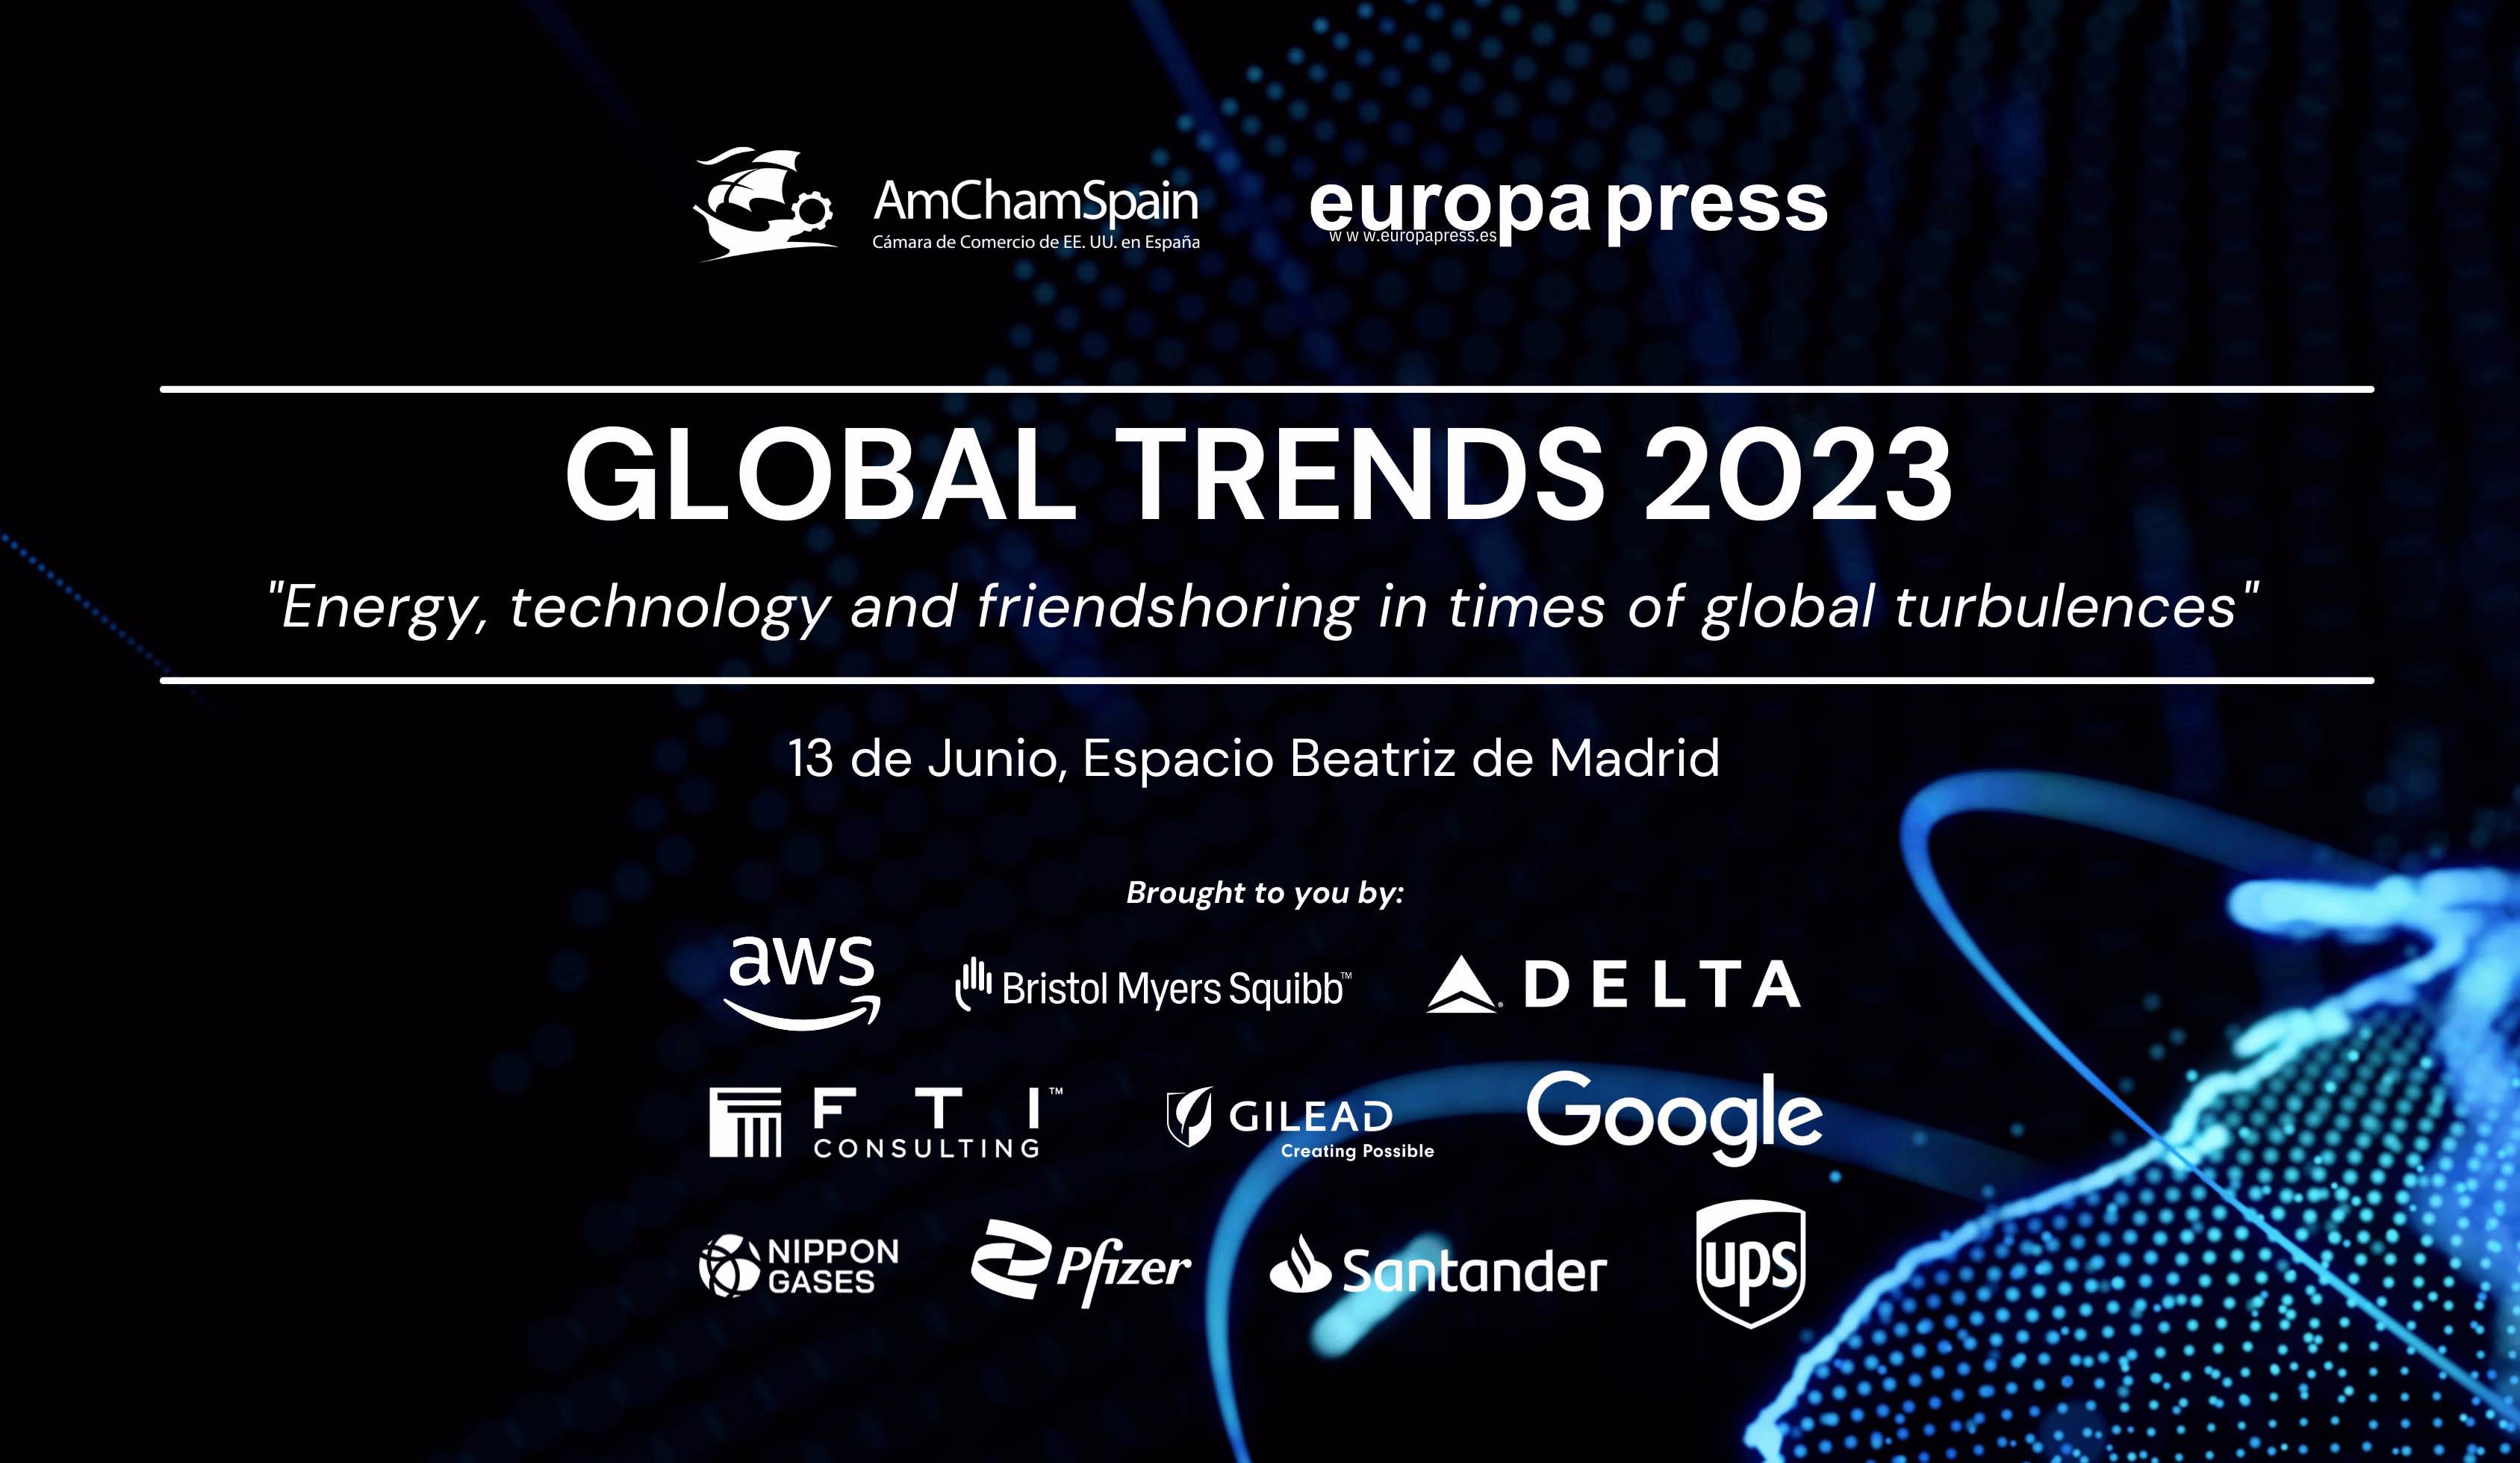 GLOBAL TRENDS 2023 "Energy, Technology and friendshoring in times of global turbulences"